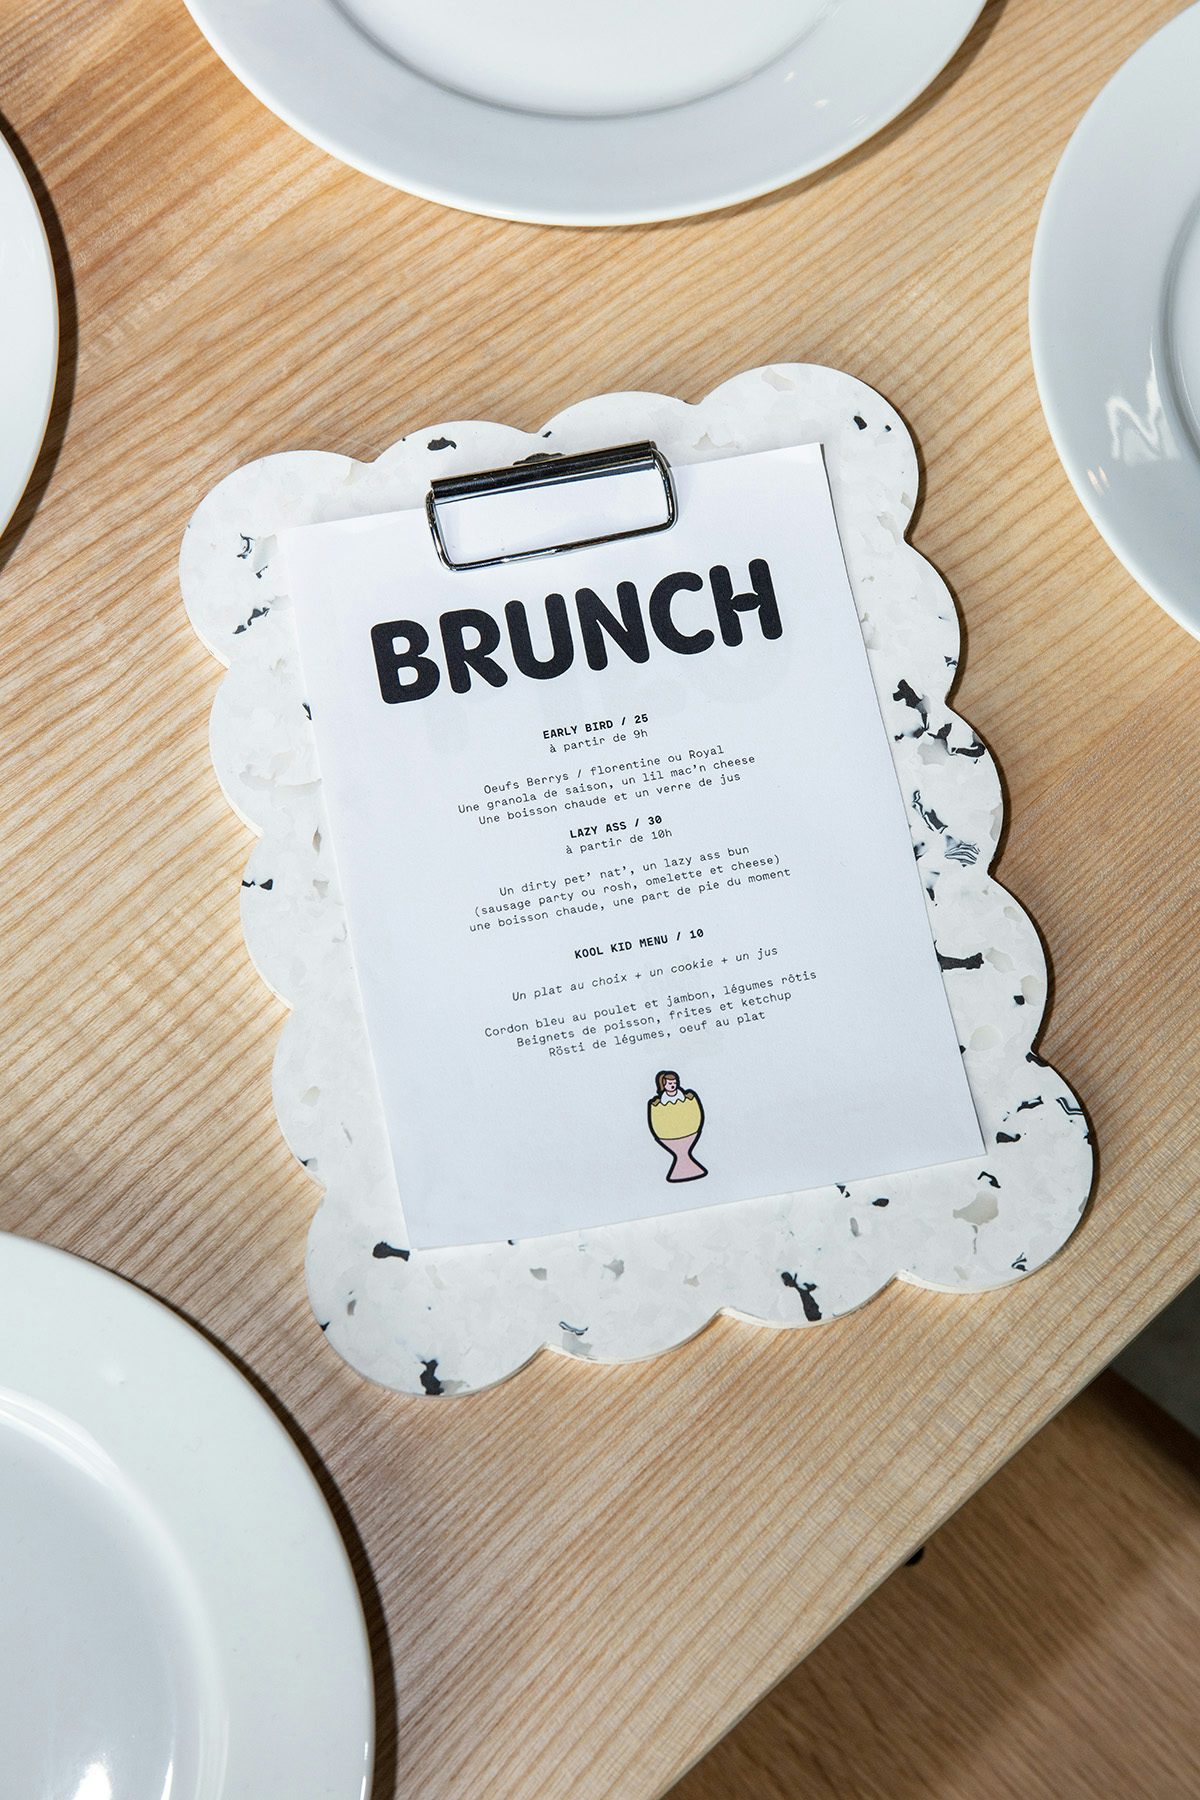 Photo of a menu with scalloped edges labelled brunch